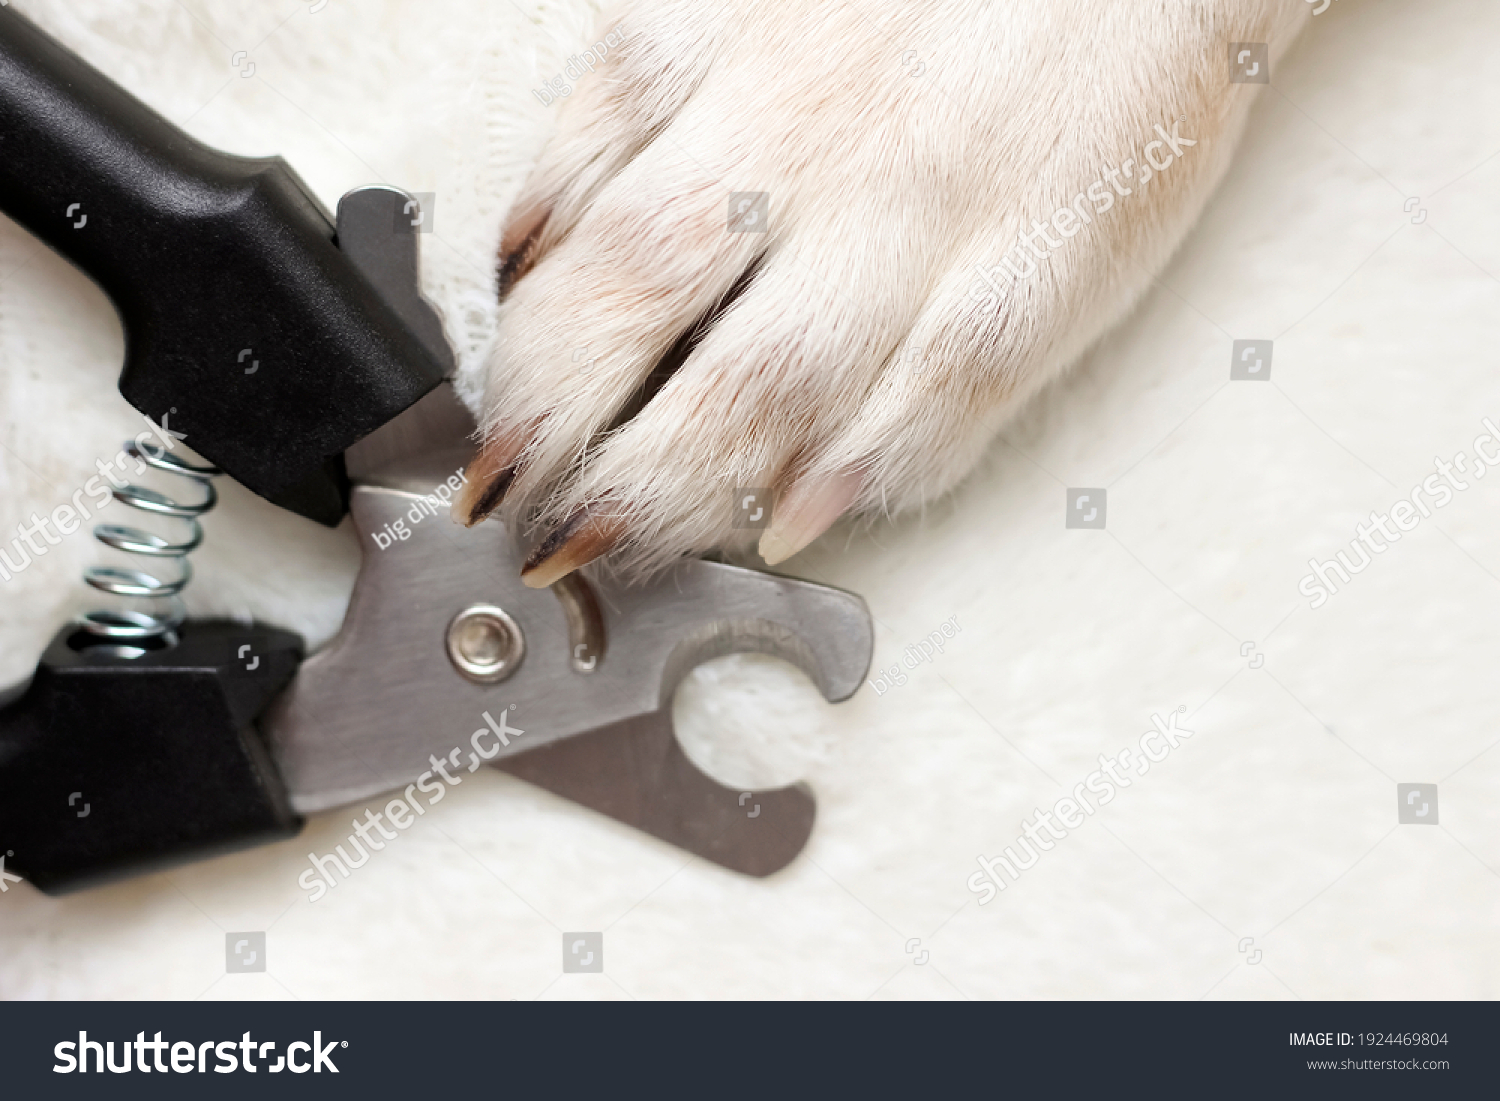 Dog's paws. Claw cutter-trimmer for cutting the claws of cats and dogs, guillotine claw cutter, black. Cutting the claws of a dog. #1924469804